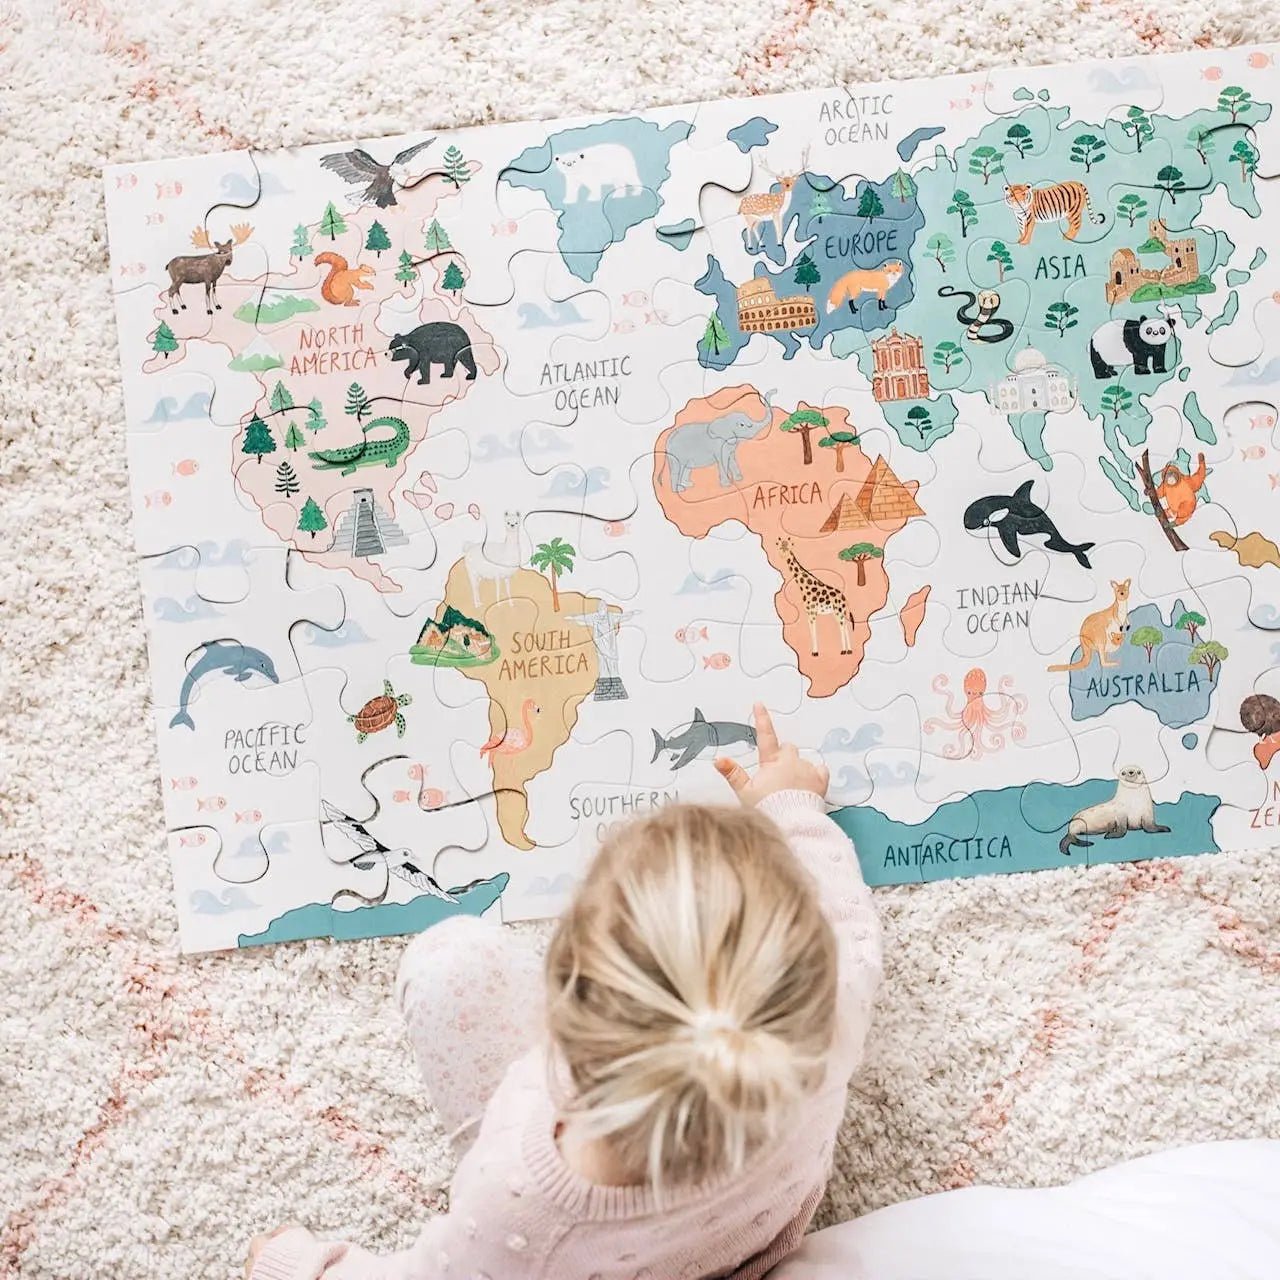 World Map Floor Puzzle - A Fun Educational Mindfulness Toy For Kids